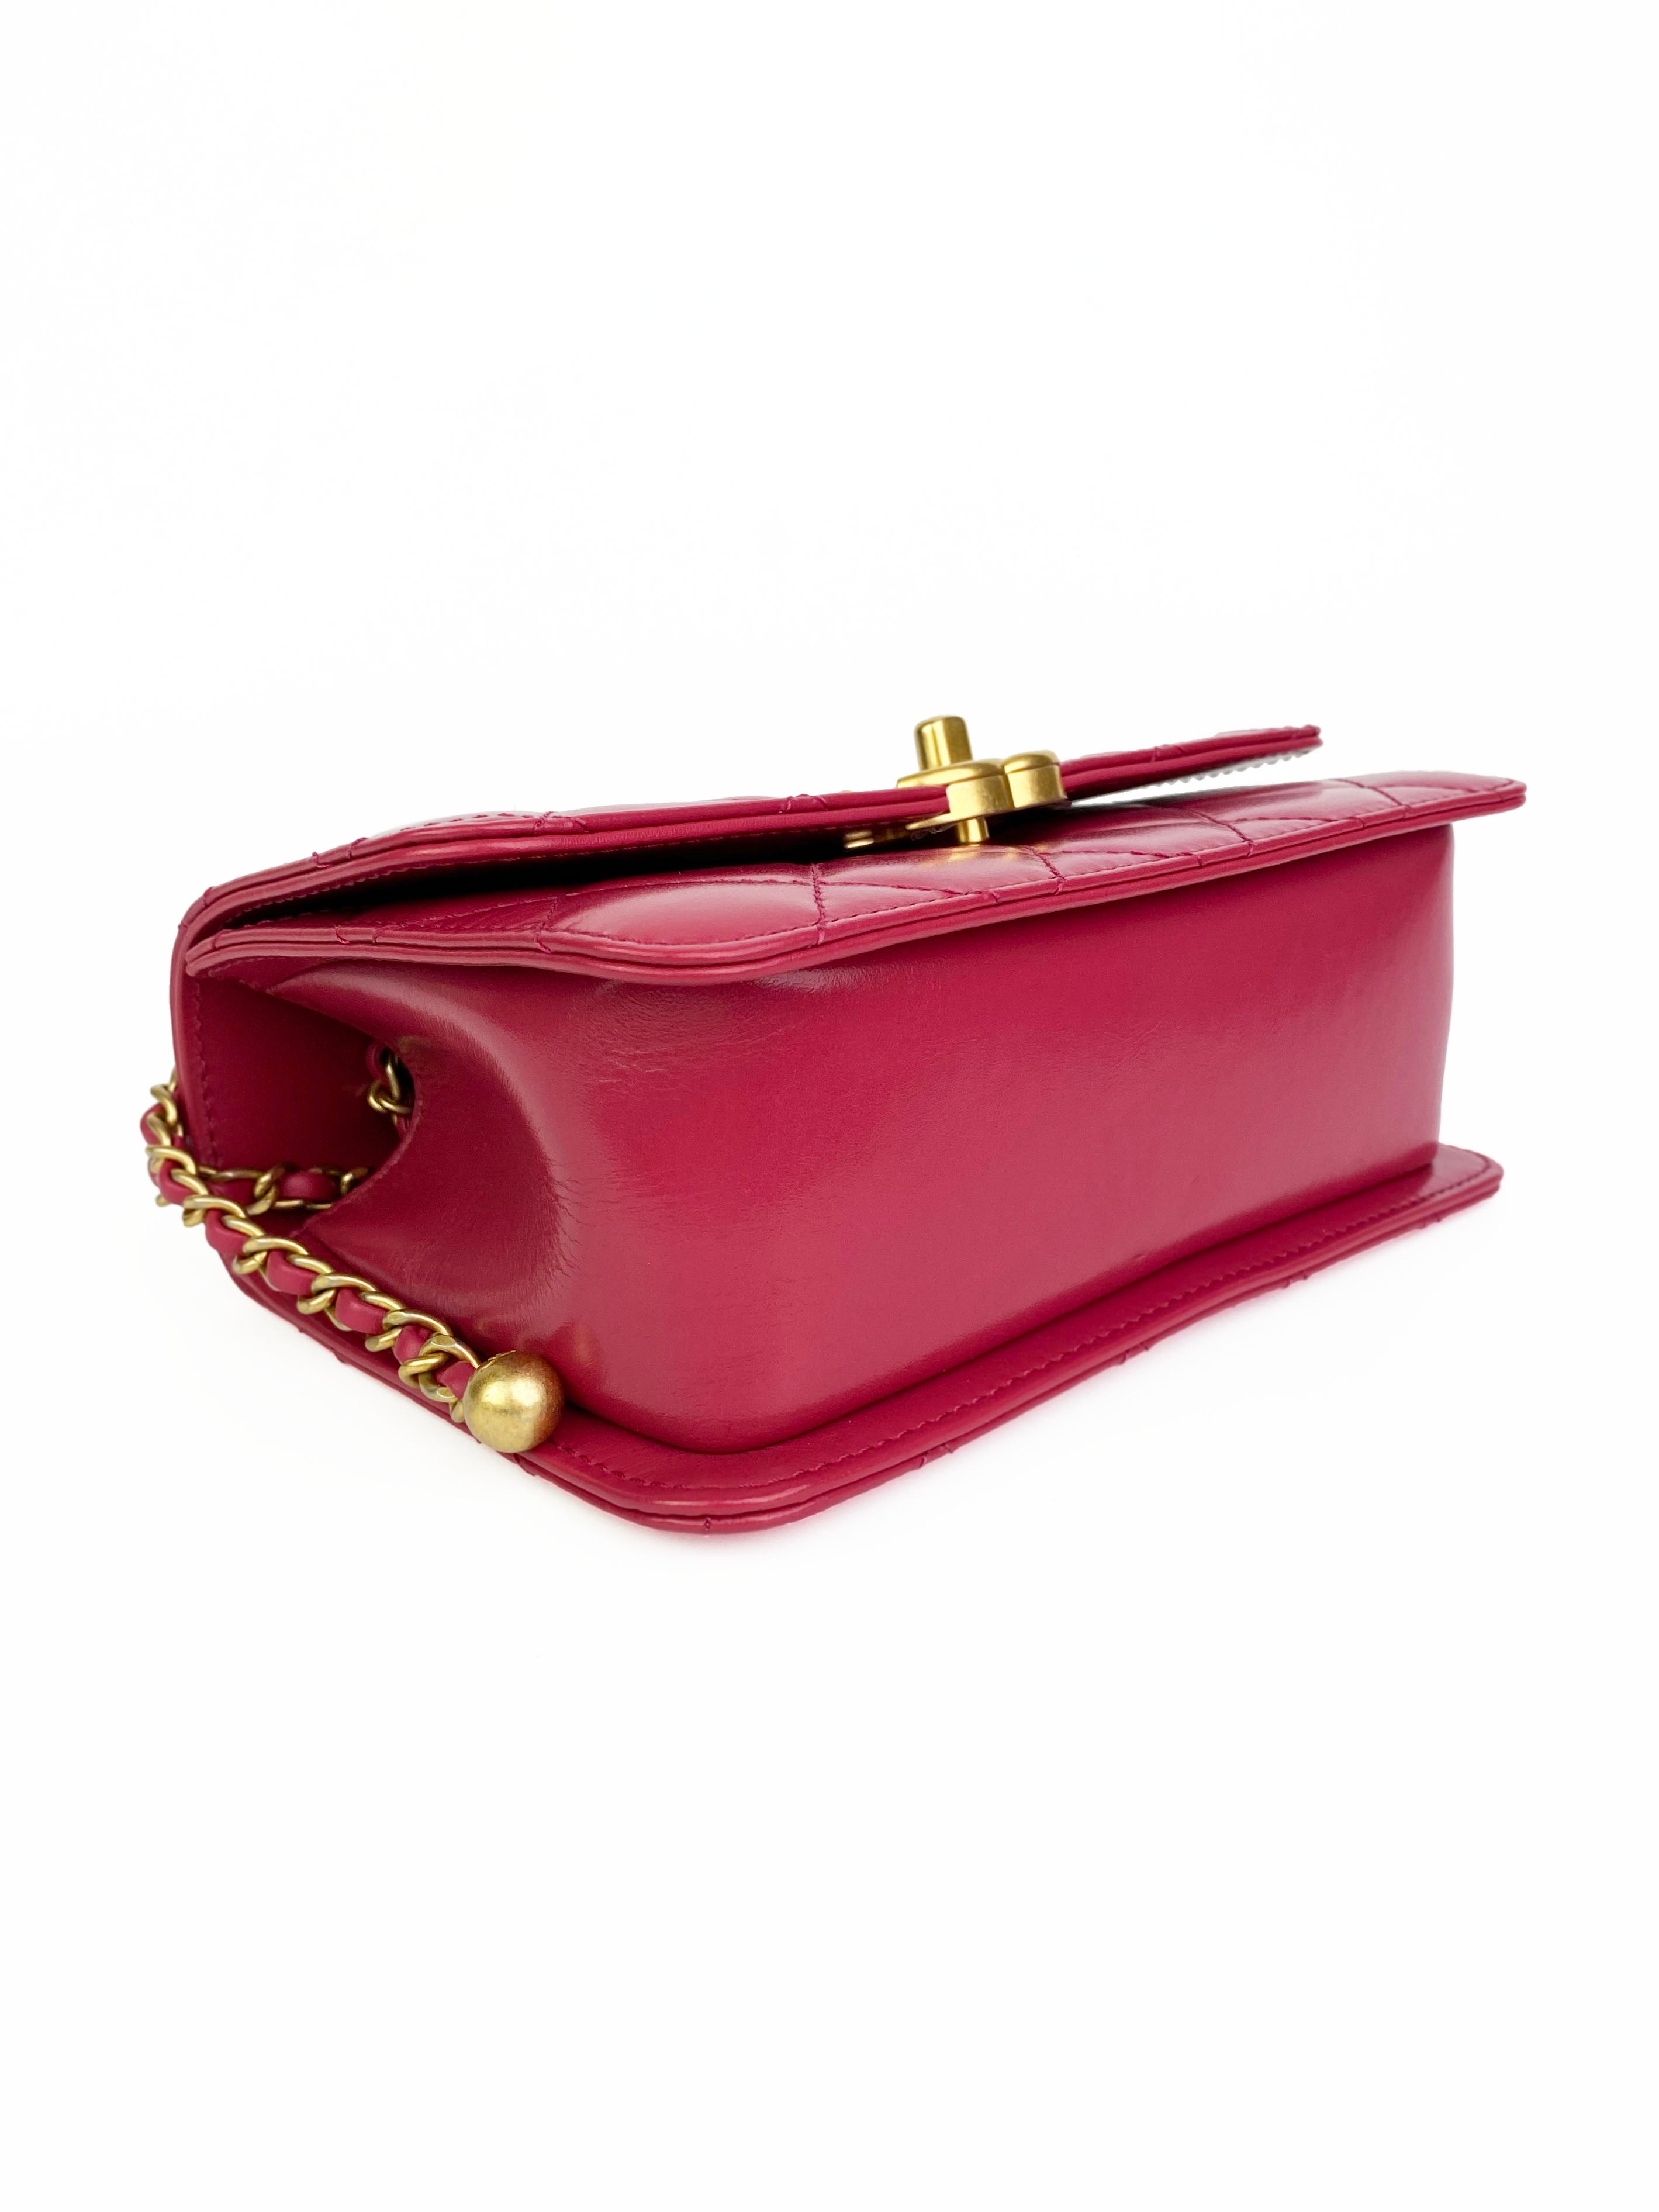 Chanel Mini Deep Pink Flap Bag with Gold Balls